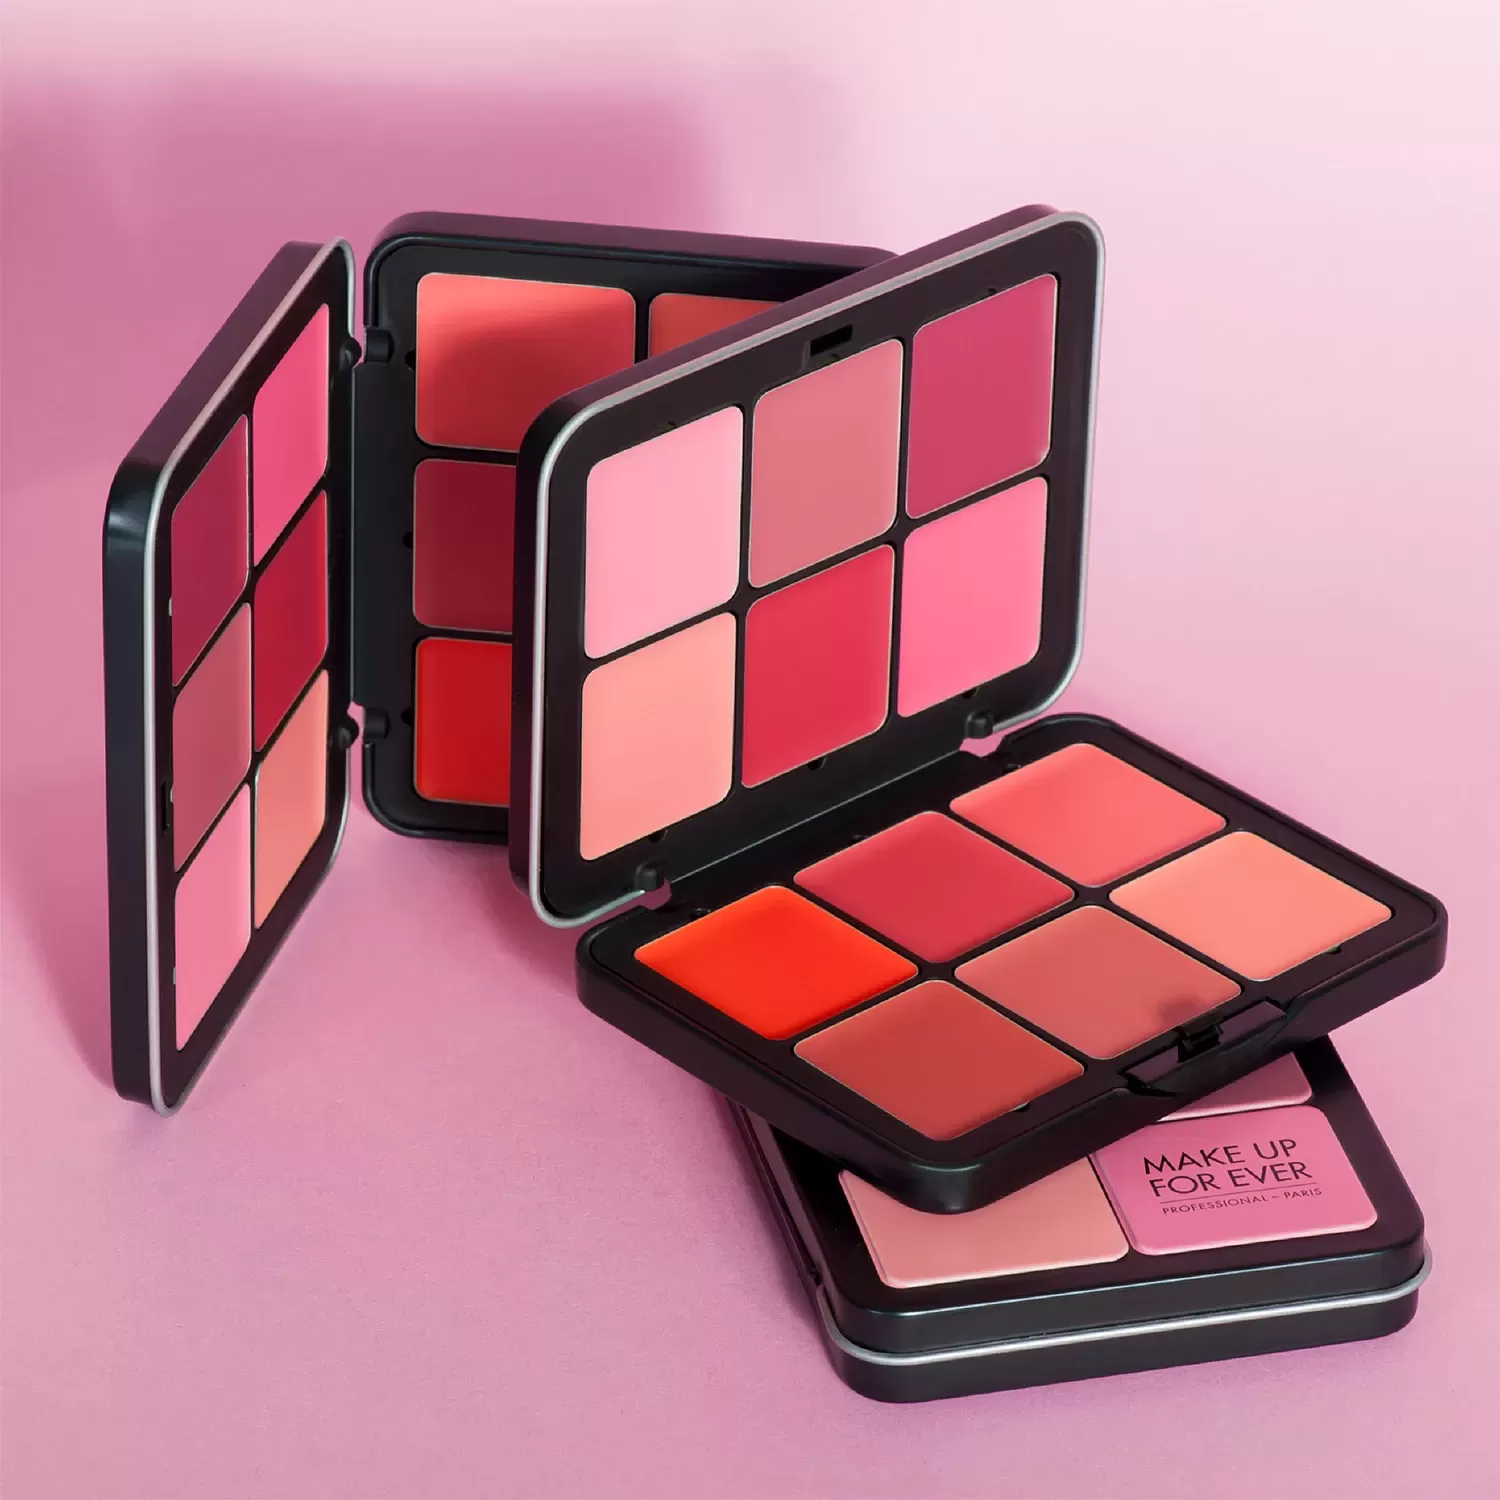 about Lip Palette MAKE UP FOR EVER ULTRA HD BLUSH PALETTE INVISIBLE COVER CREAM BLUSH PALETTE